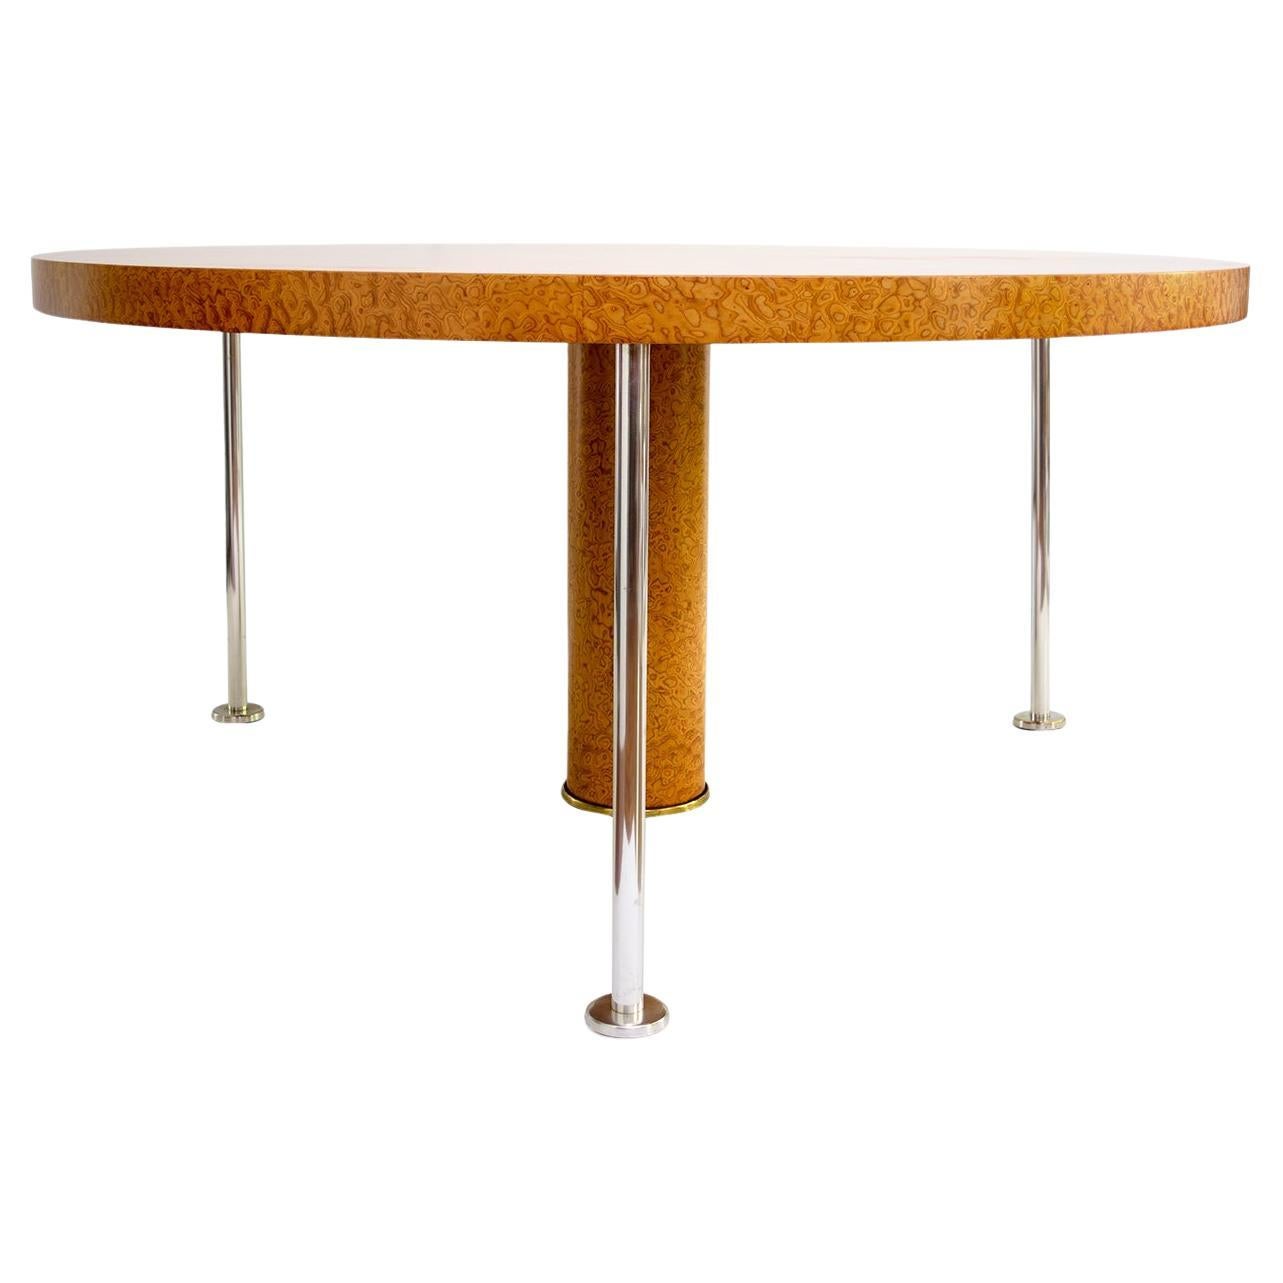 Ettore Sottsass "OSPITE" Dinning Table Bria Wood Veneer 3 Silver Plated Legs For Sale